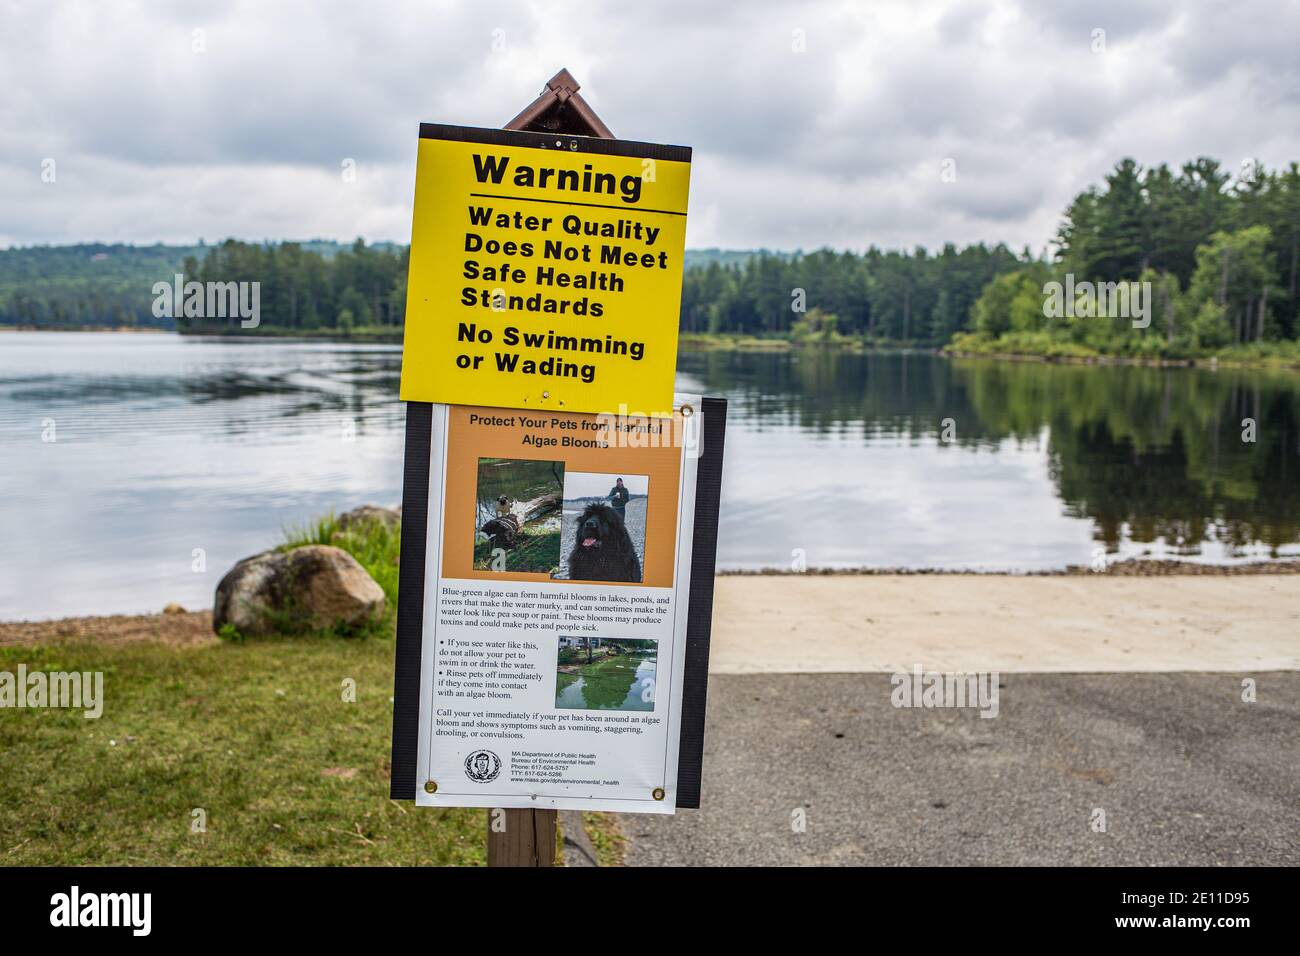 A water quality warning sign at Tully Lake in Royalston, Massachusetts Stock Photo